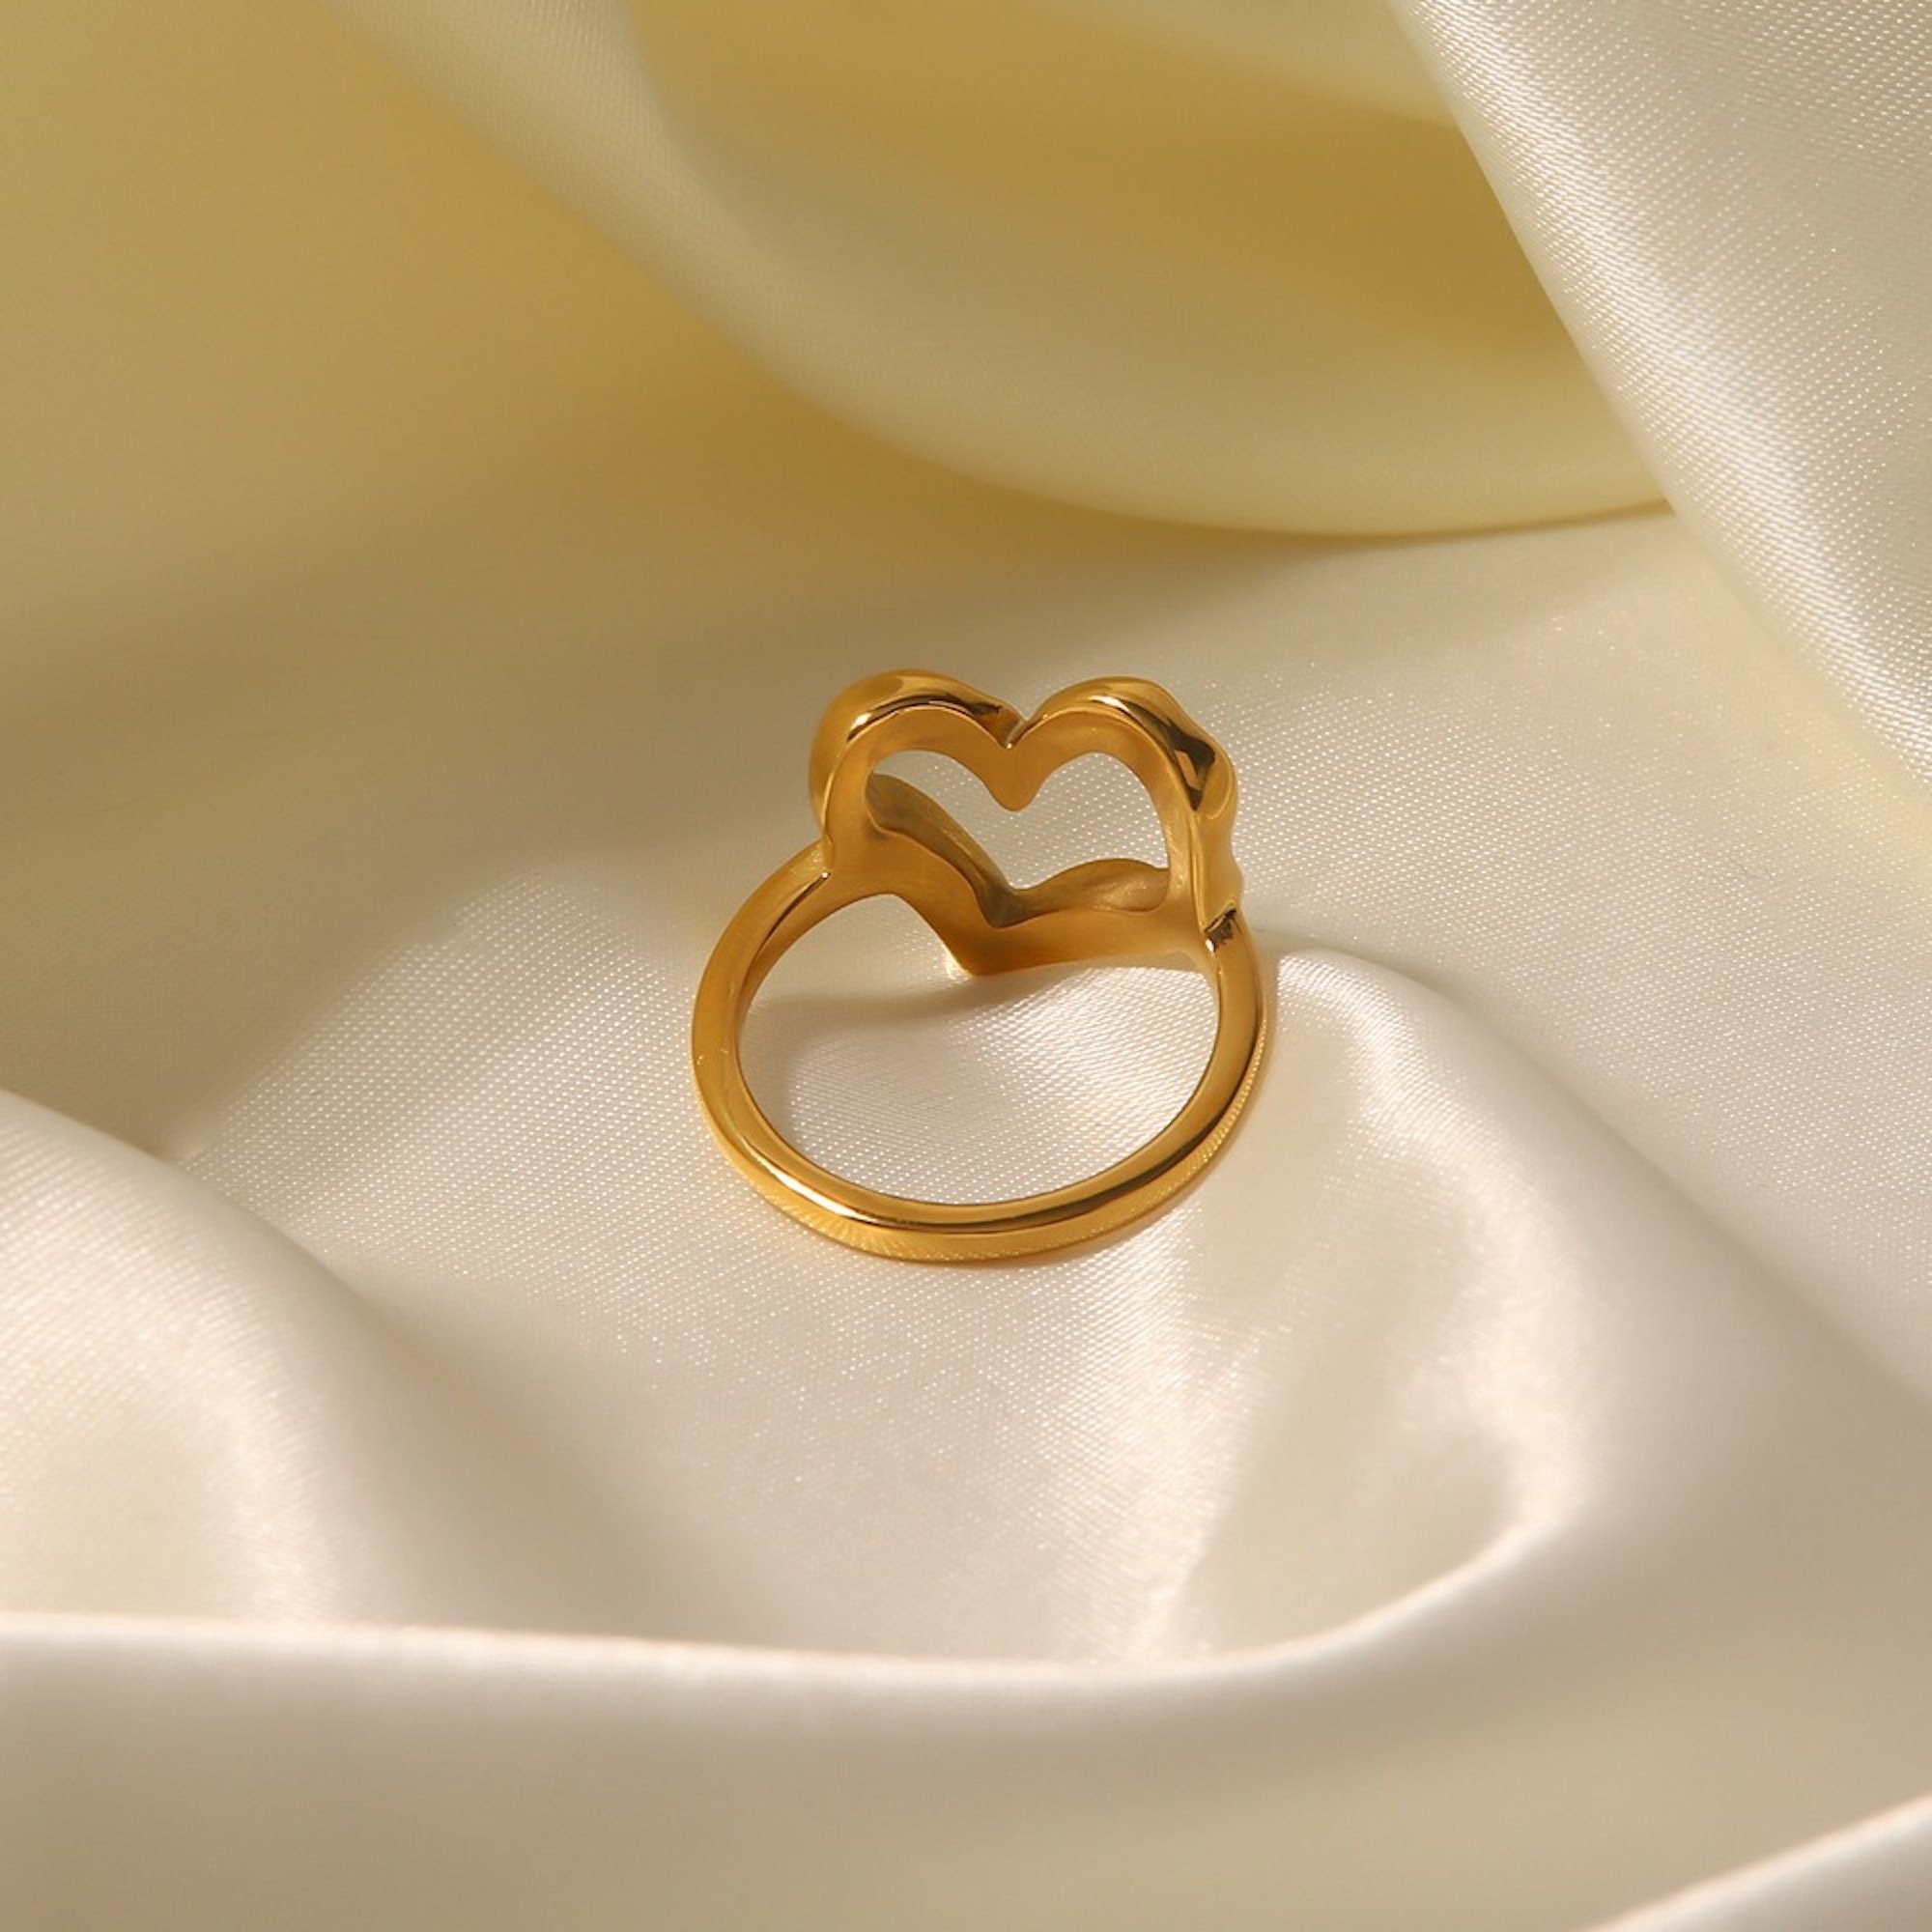 Five Star Jewelry - Dainty Love Ring Heart Accent Love Band LV American Contemporary Onyx 10K Gold